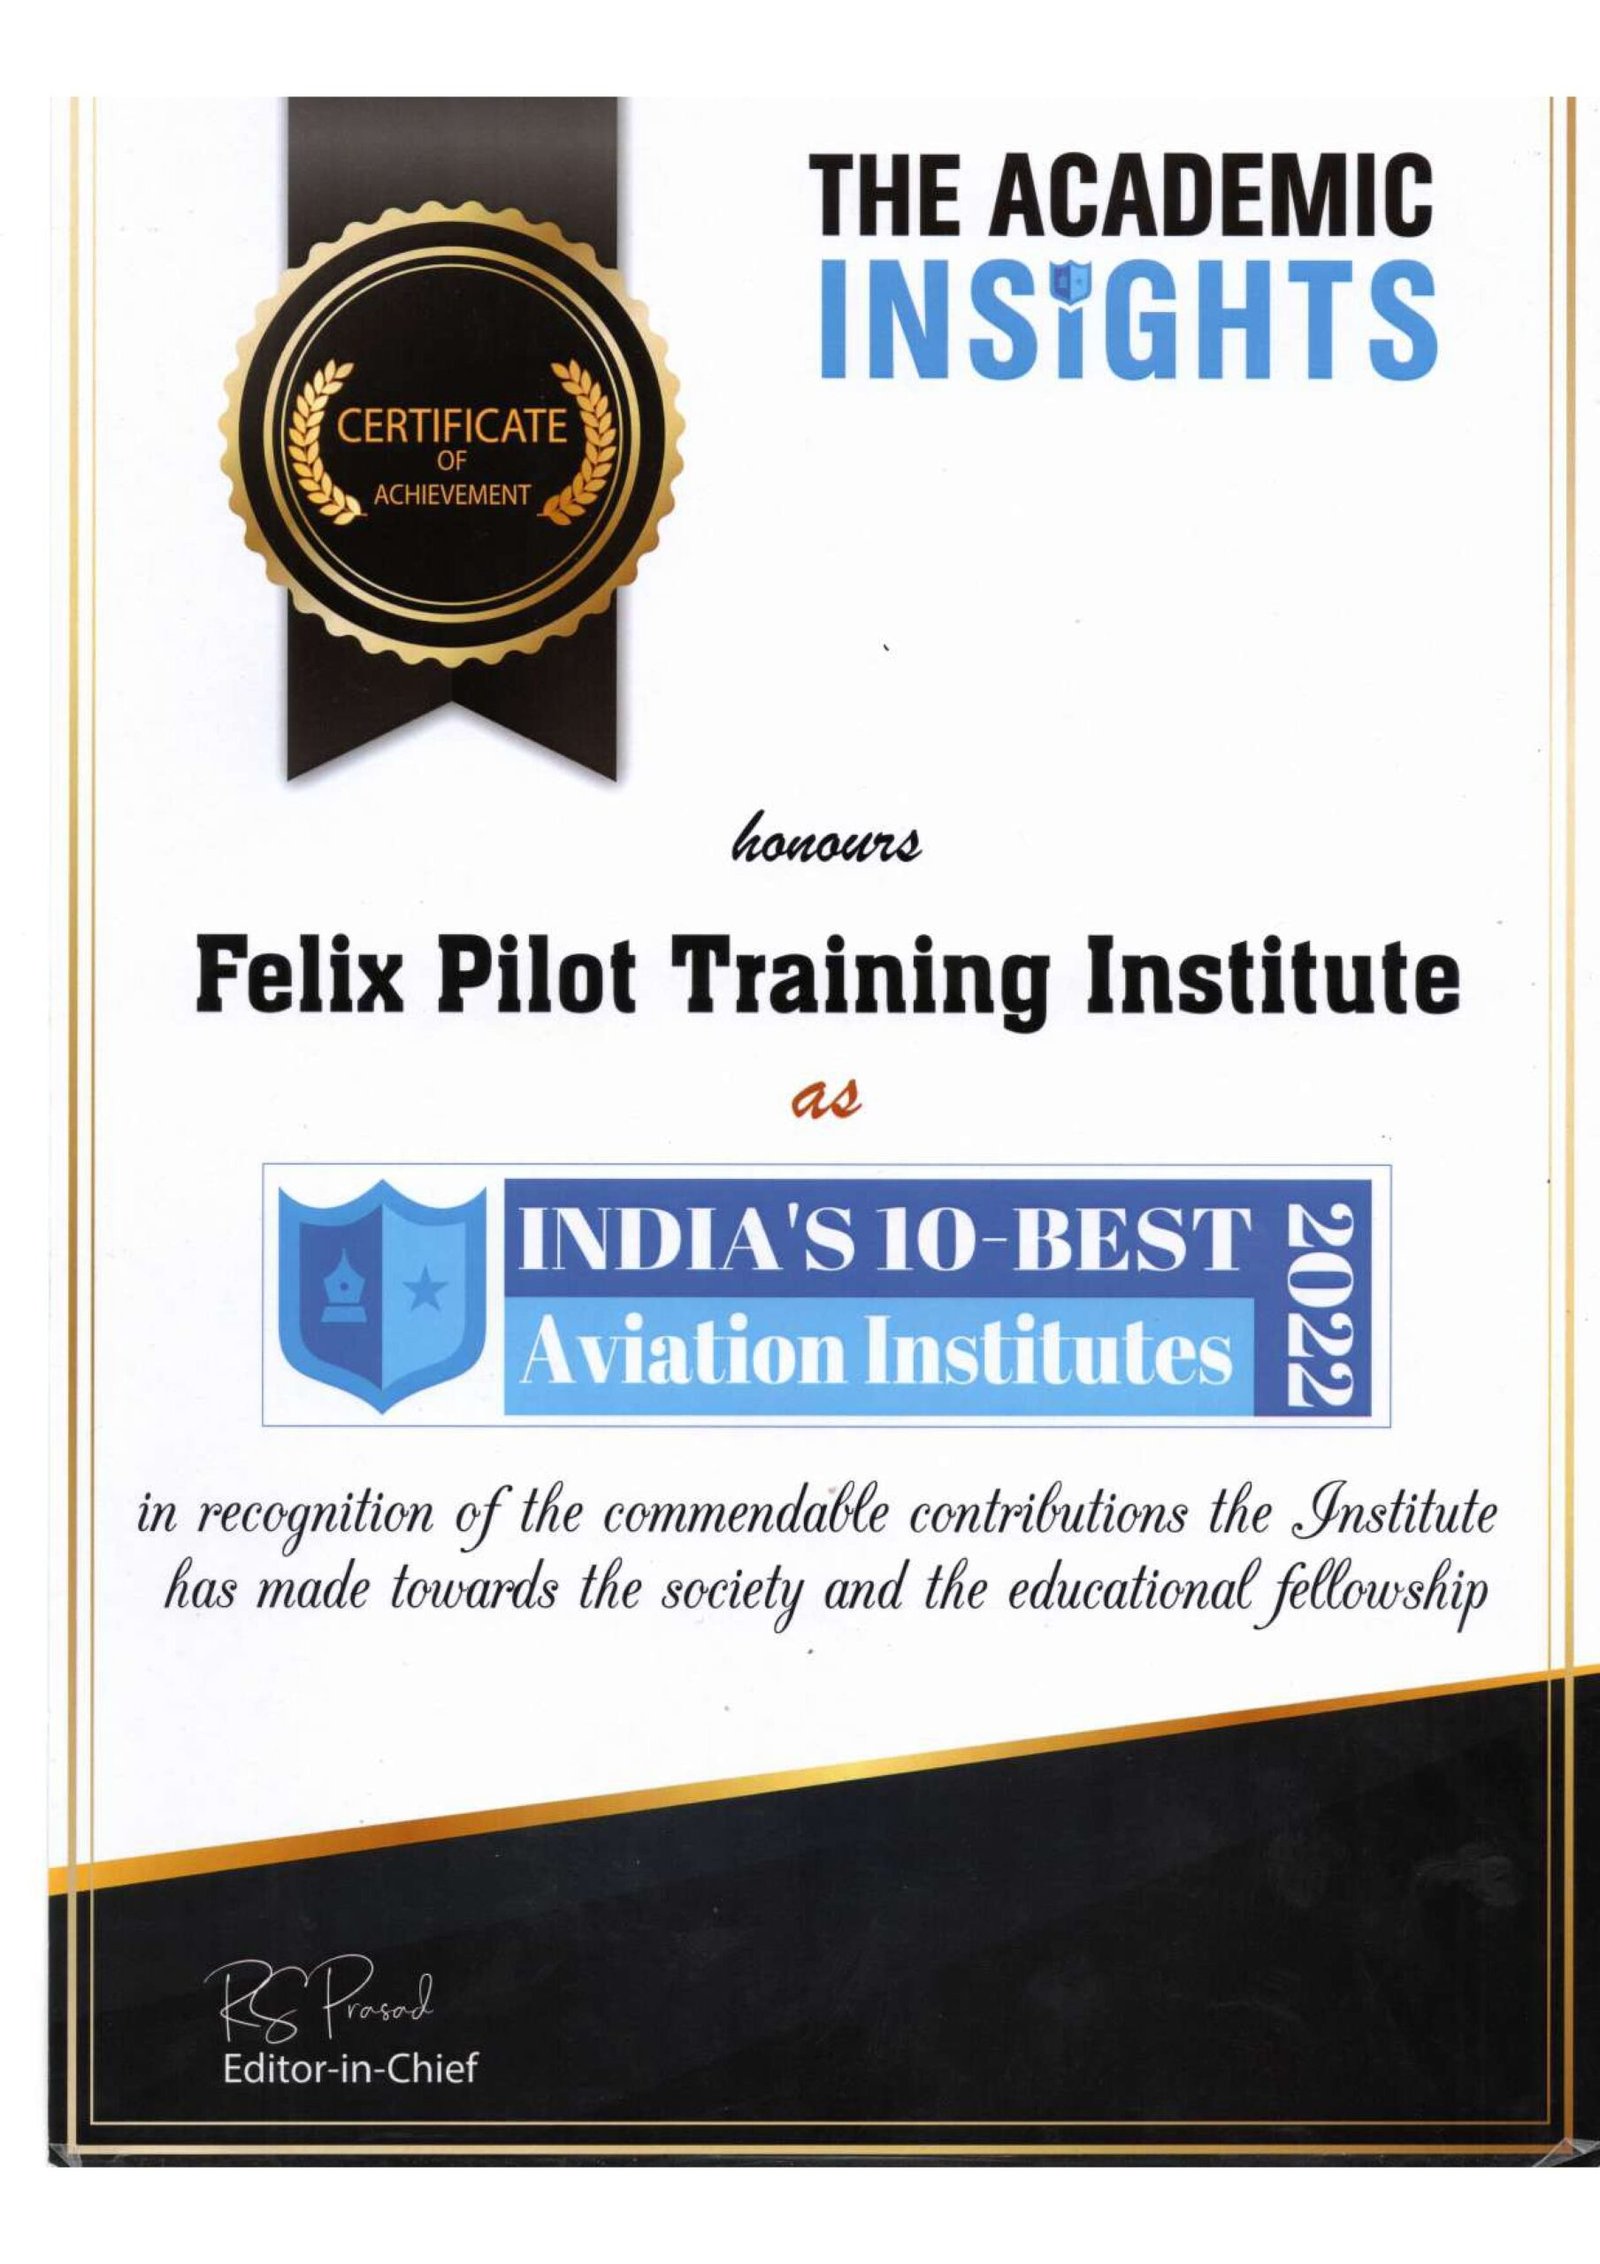 India's 10 Best Aviation Institutes - The Academic Insights